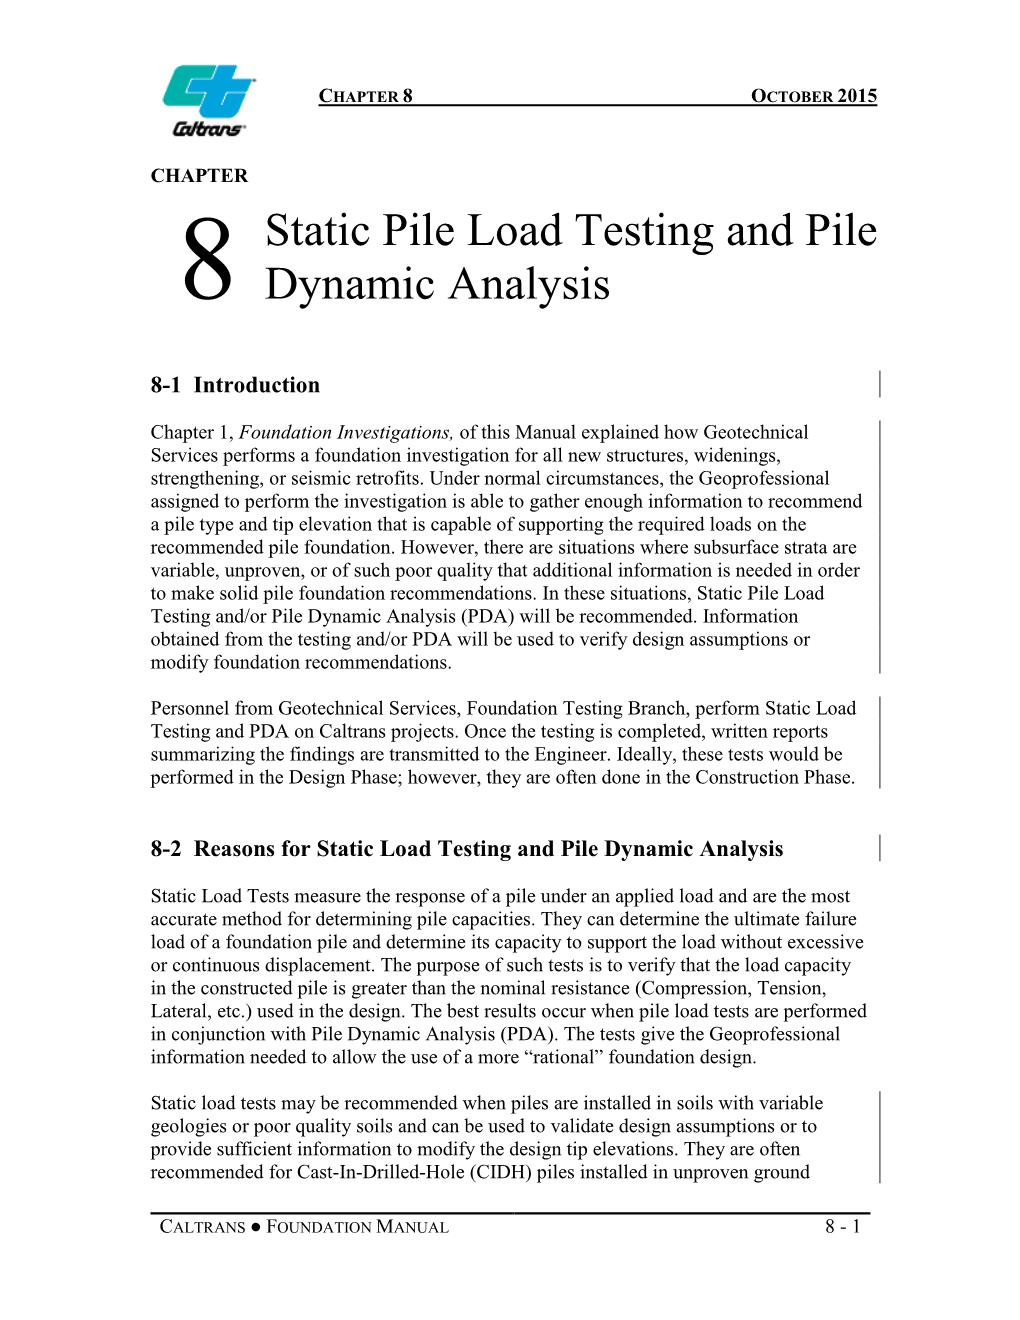 Foundation Manual Chapter 8, Static Pile Load Testing and Pile Dynamic